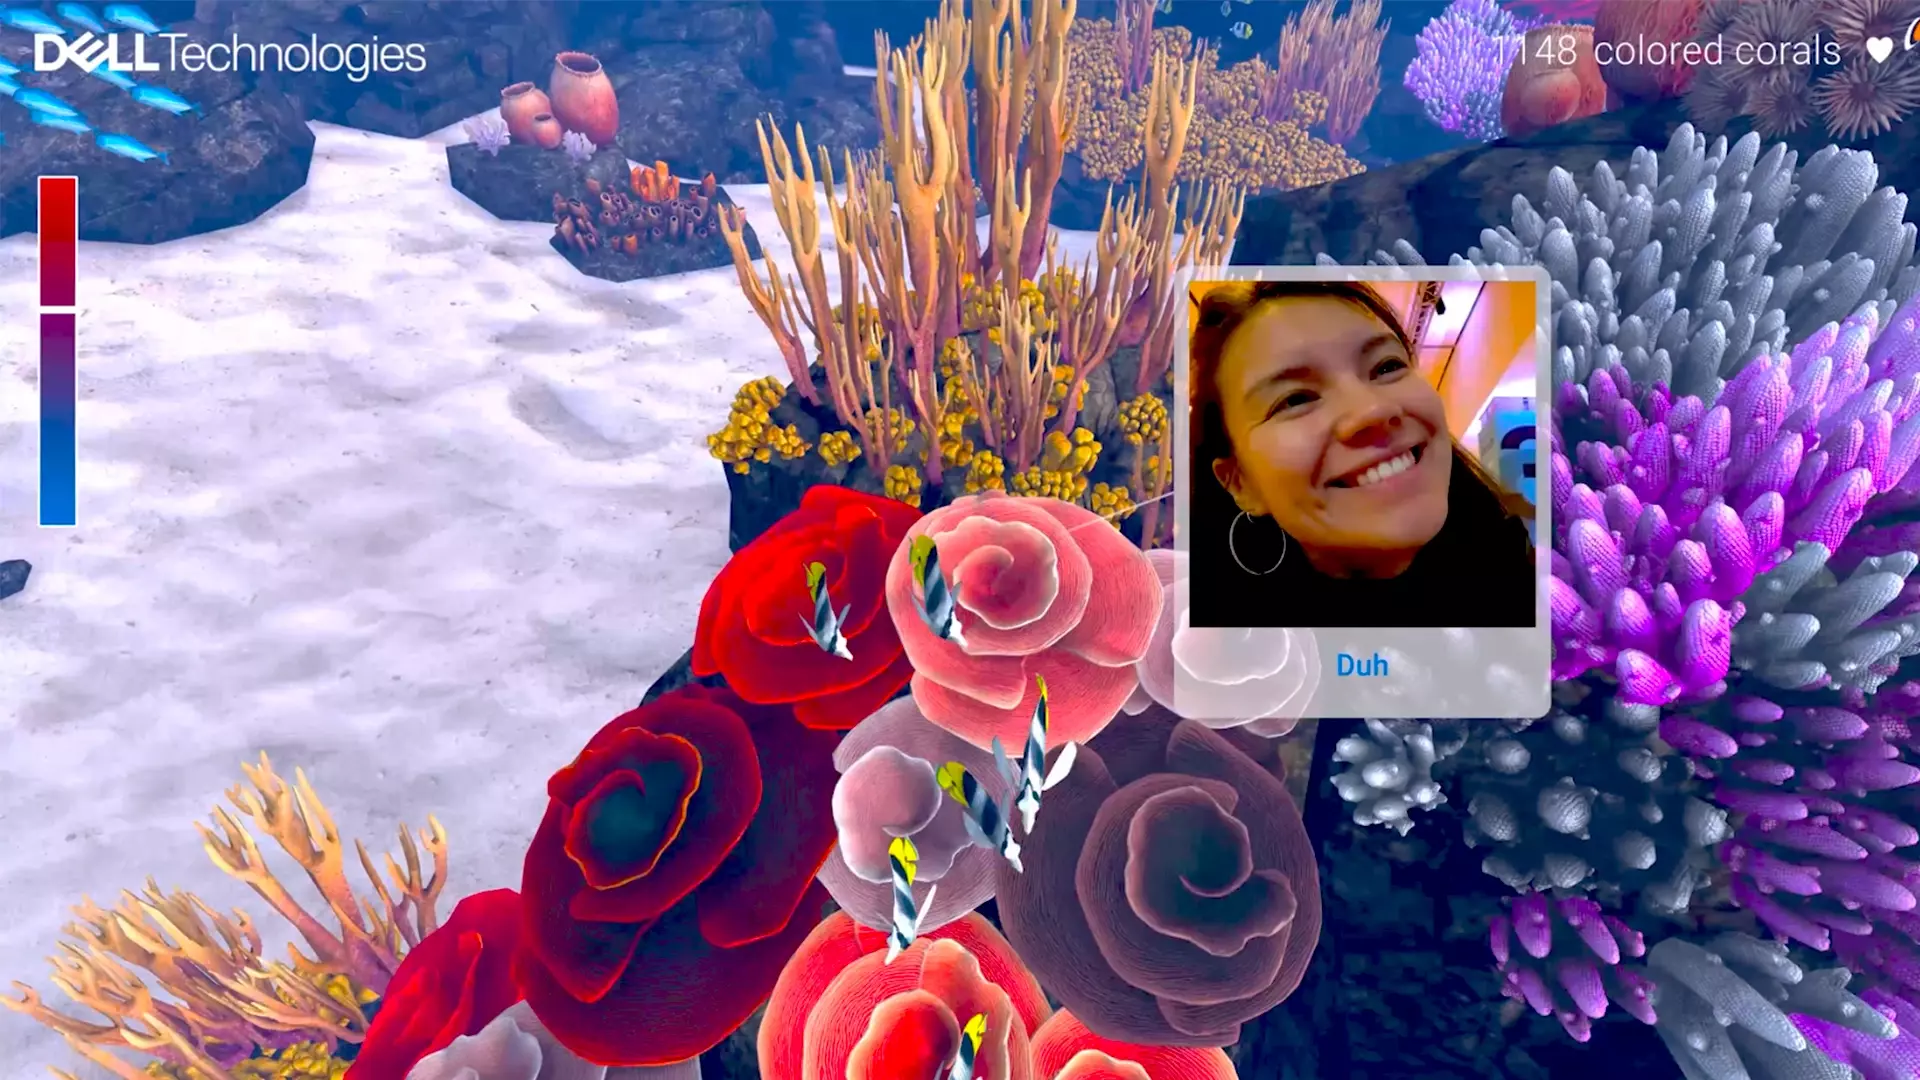 A photo of a participant appears in the Great Barrier Reef Experience digital installation